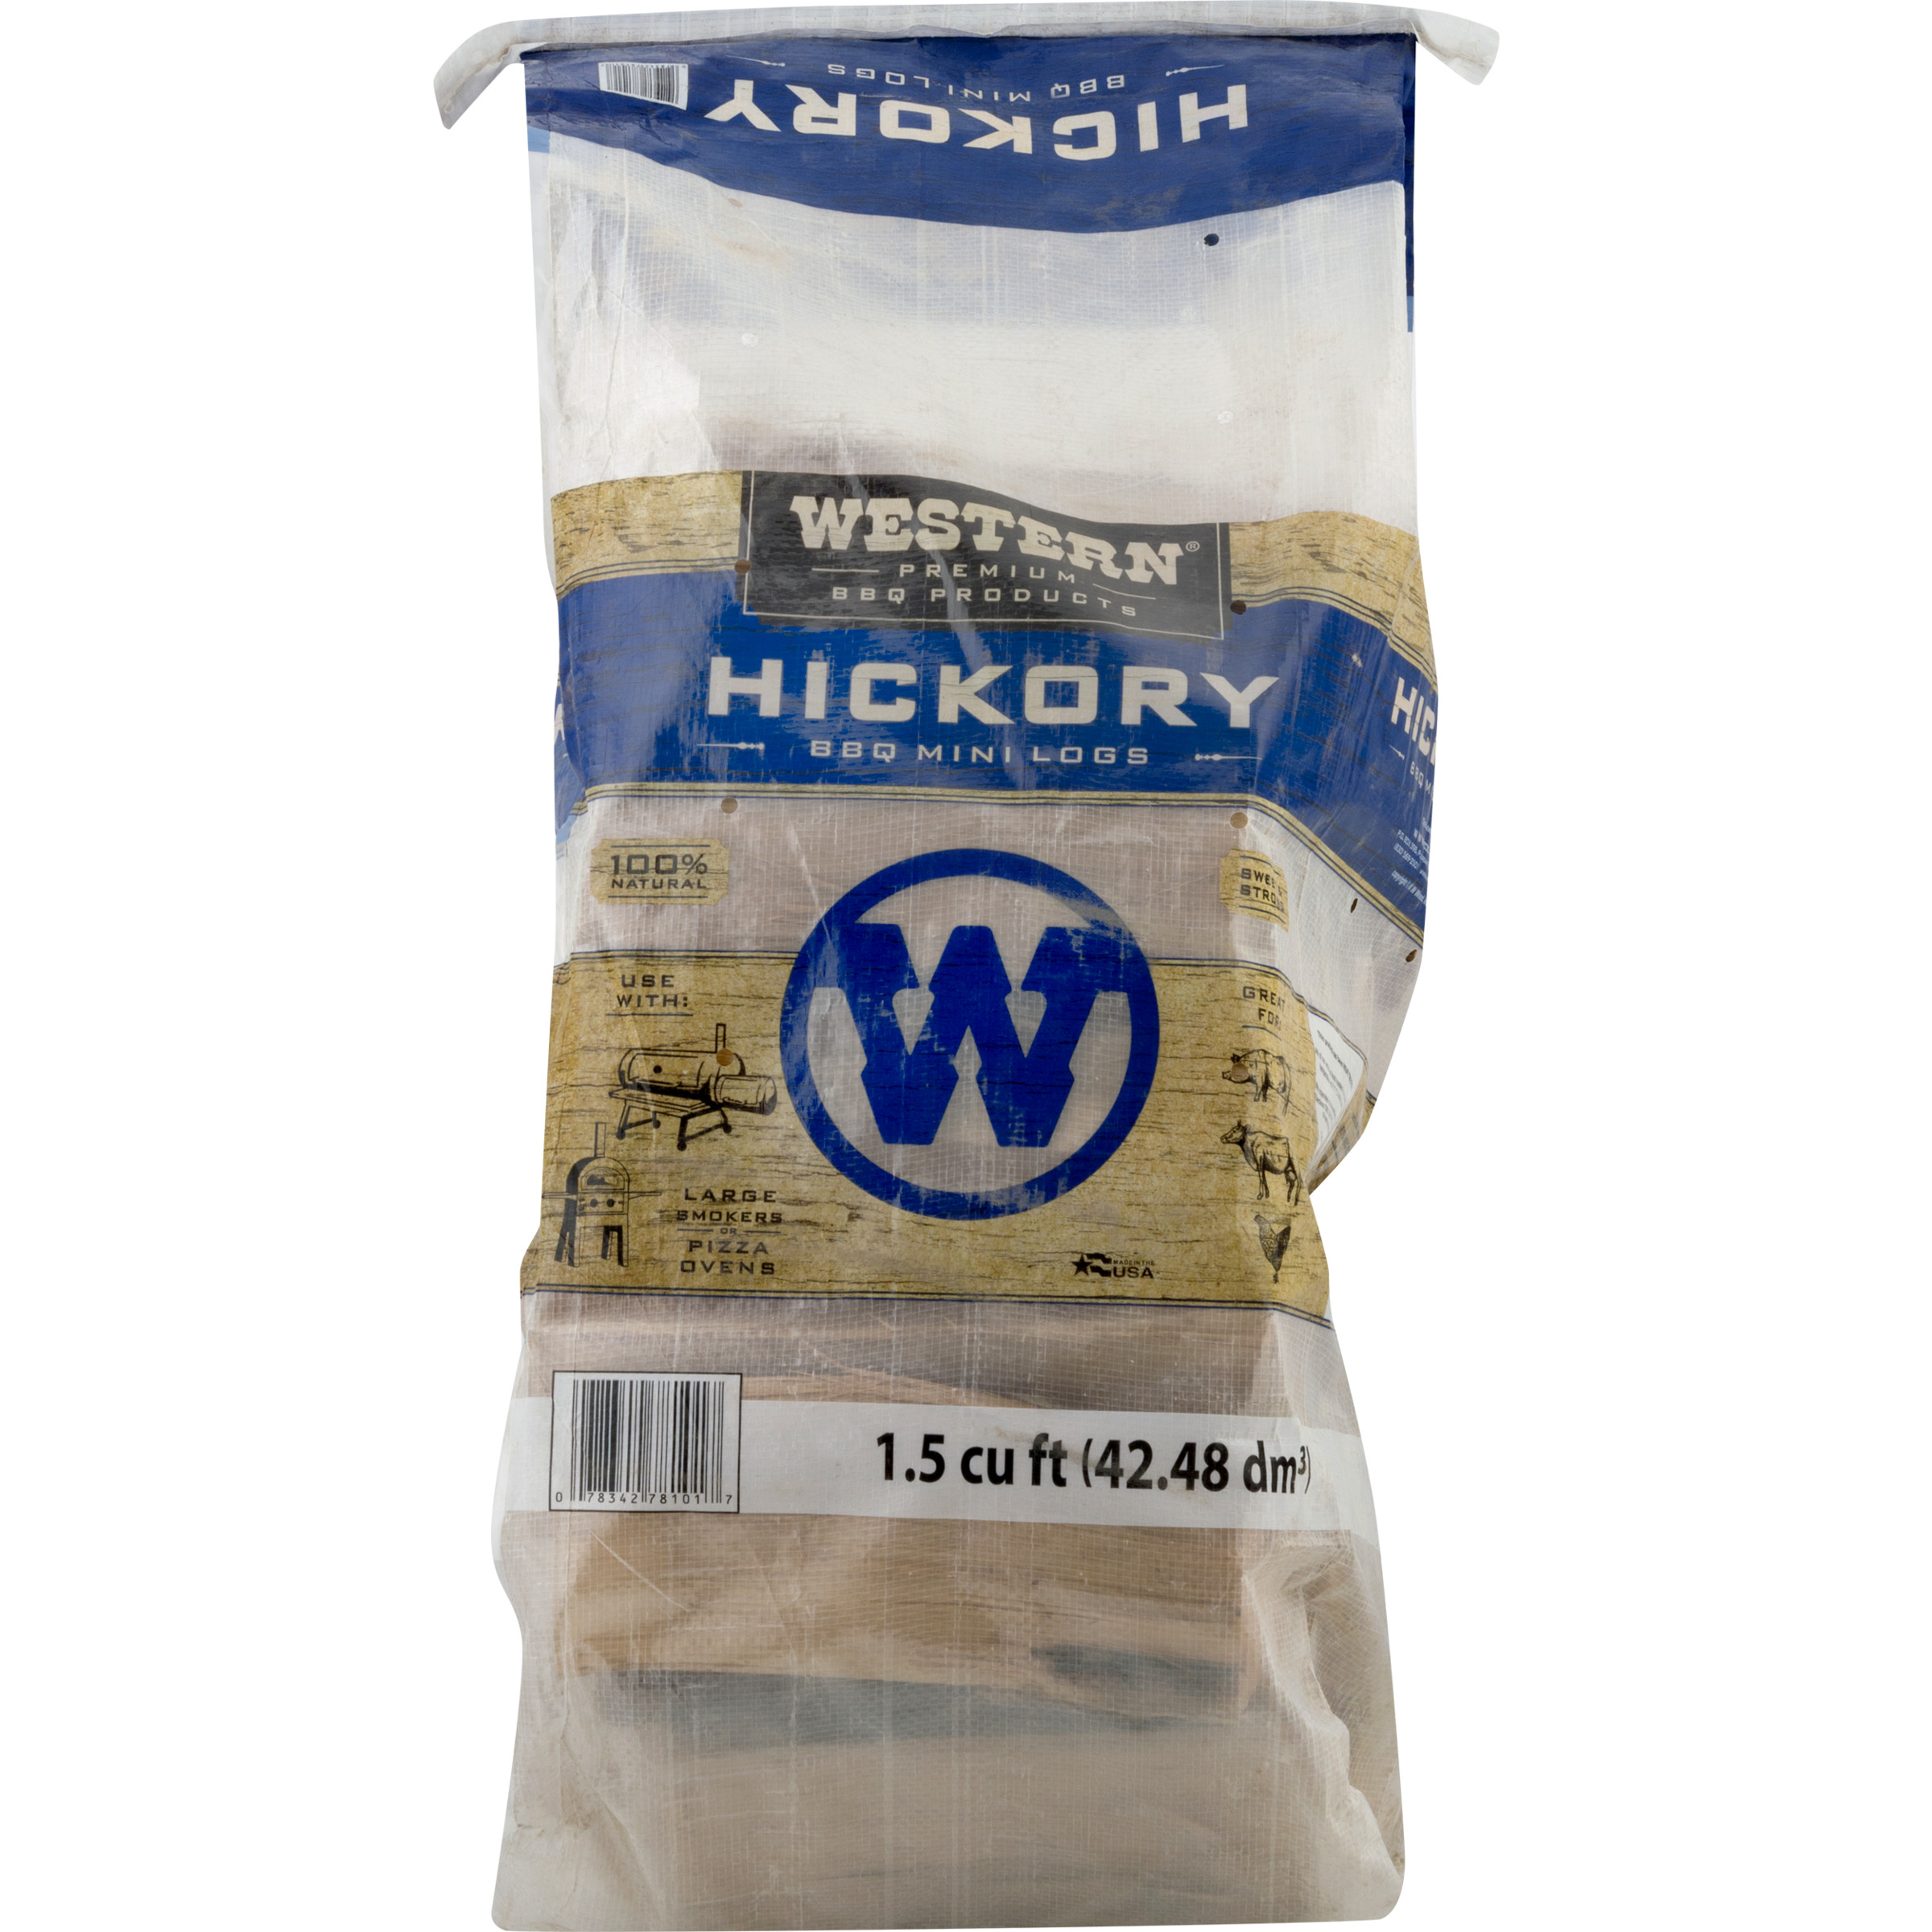 Western Premium BBQ Products 1.5 cu ft Hickory BBQ Smoking Mini Logs - image 4 of 8